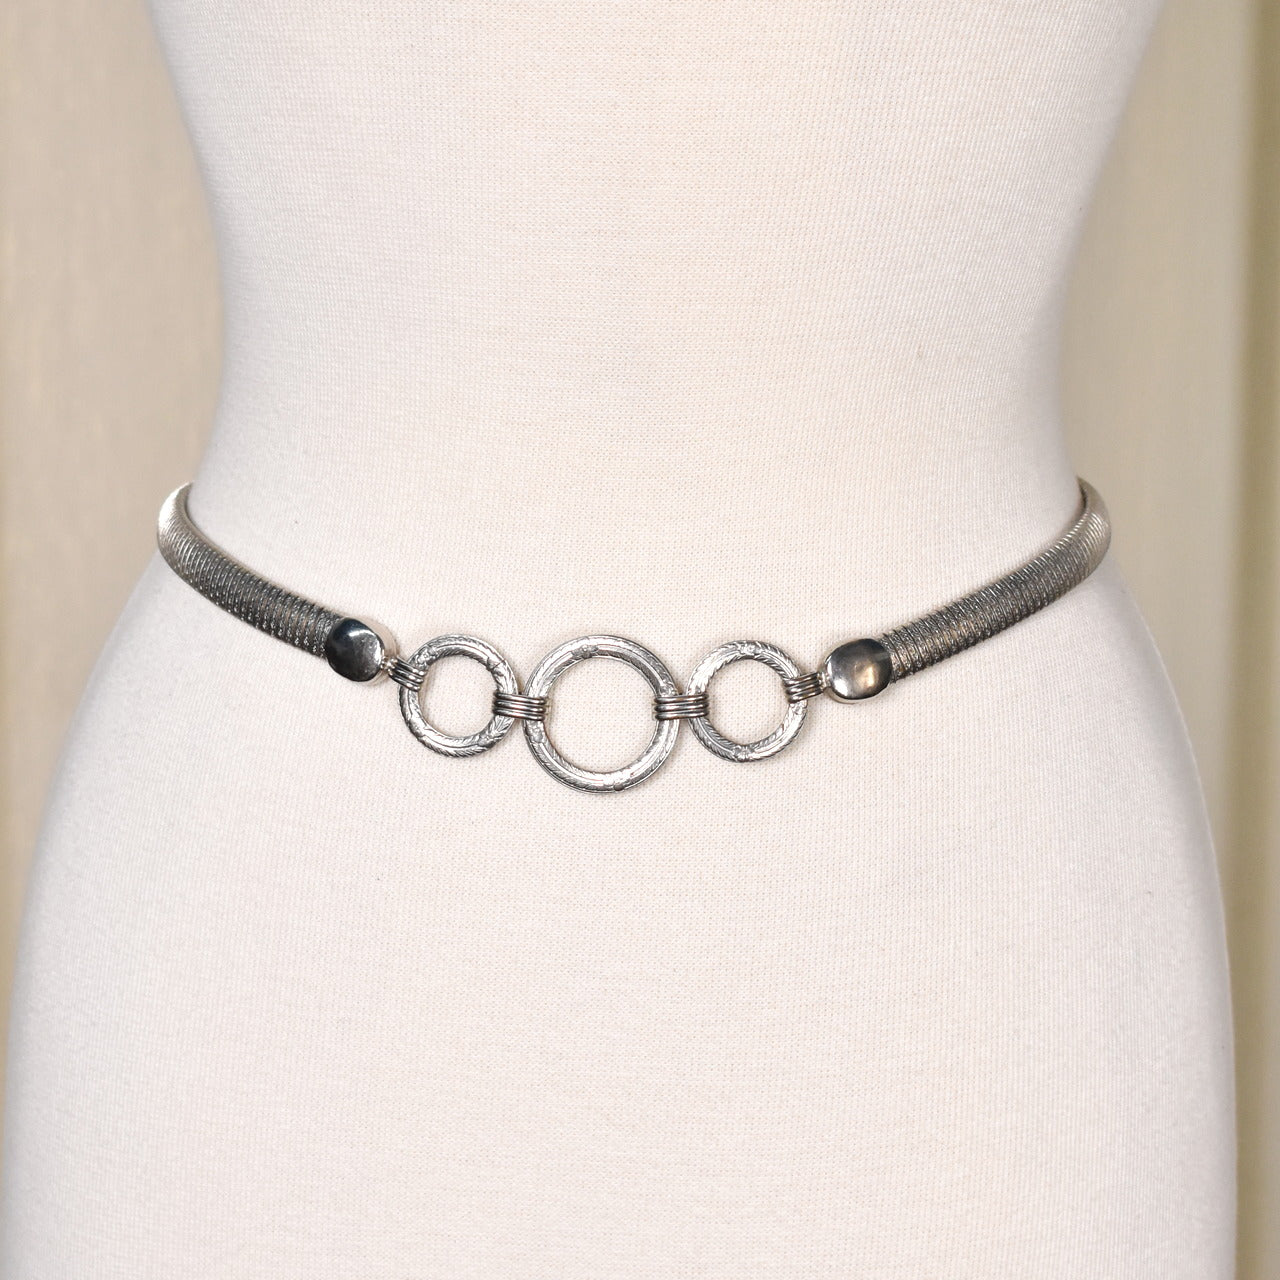 1980s Silver Ring Stretch Belt Cats Like Us